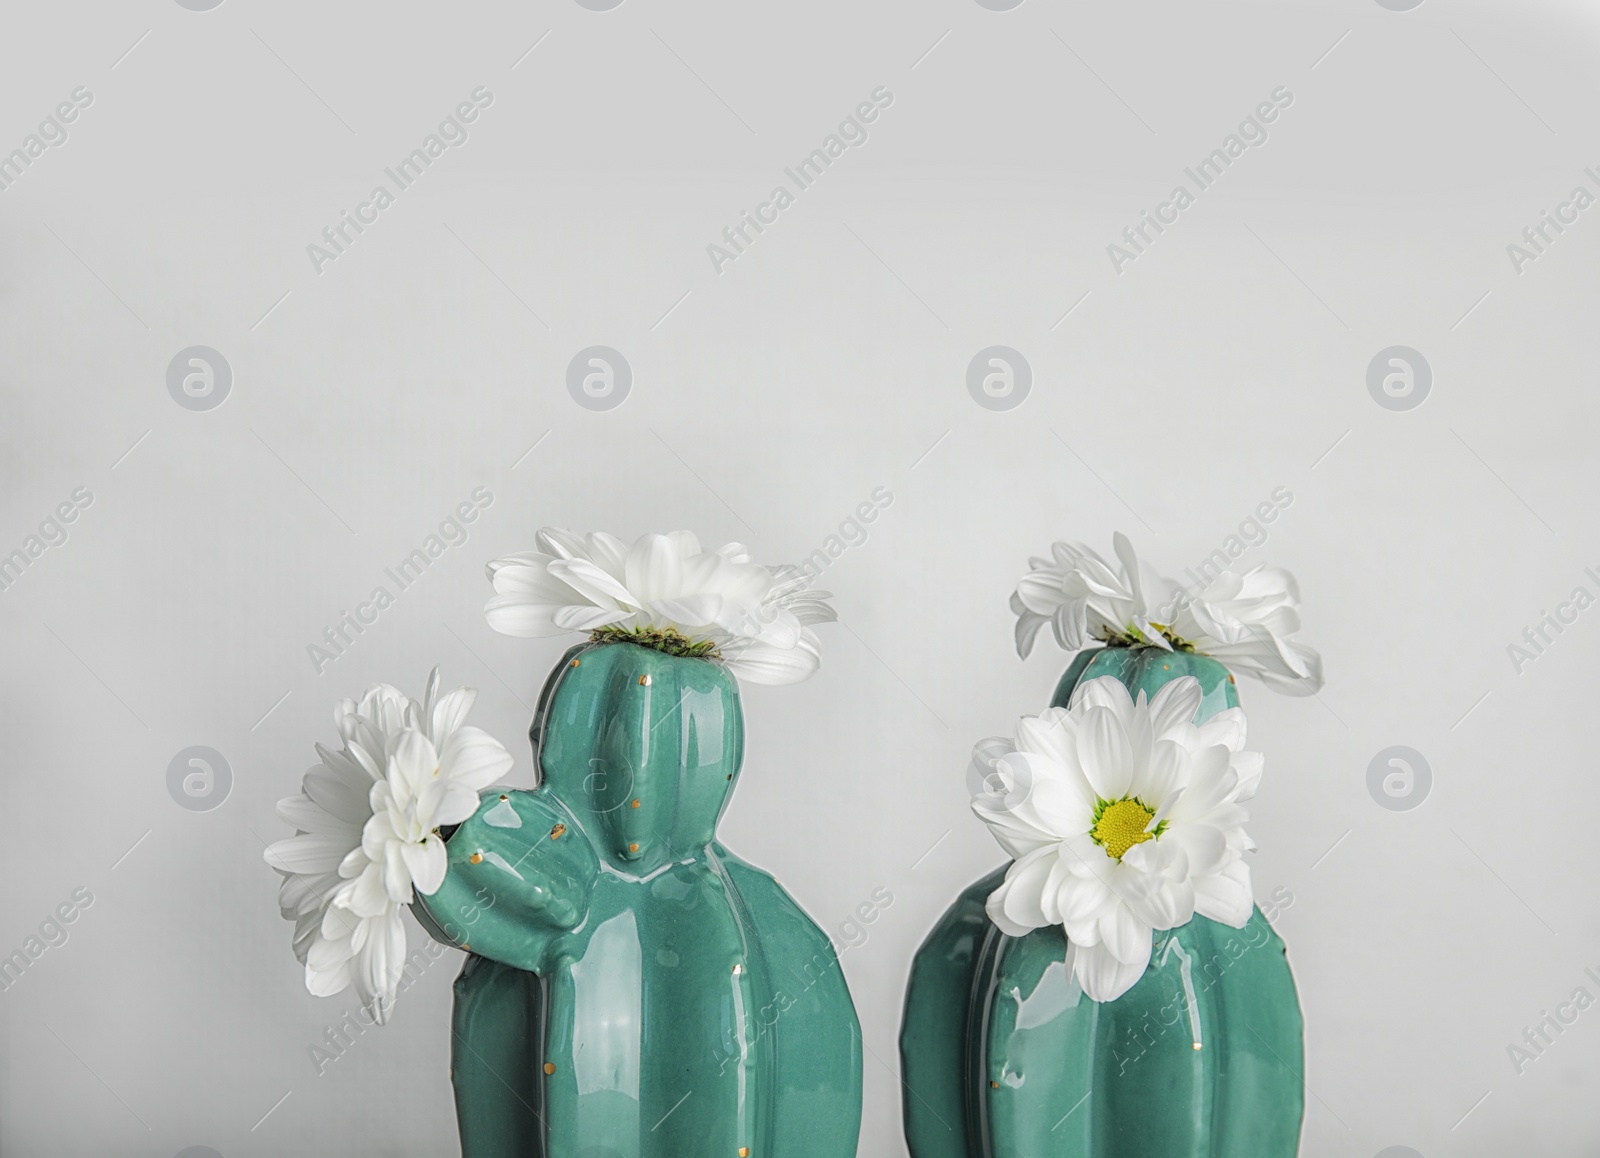 Photo of Trendy cactus shaped vases with flowers against light wall. Creative decor